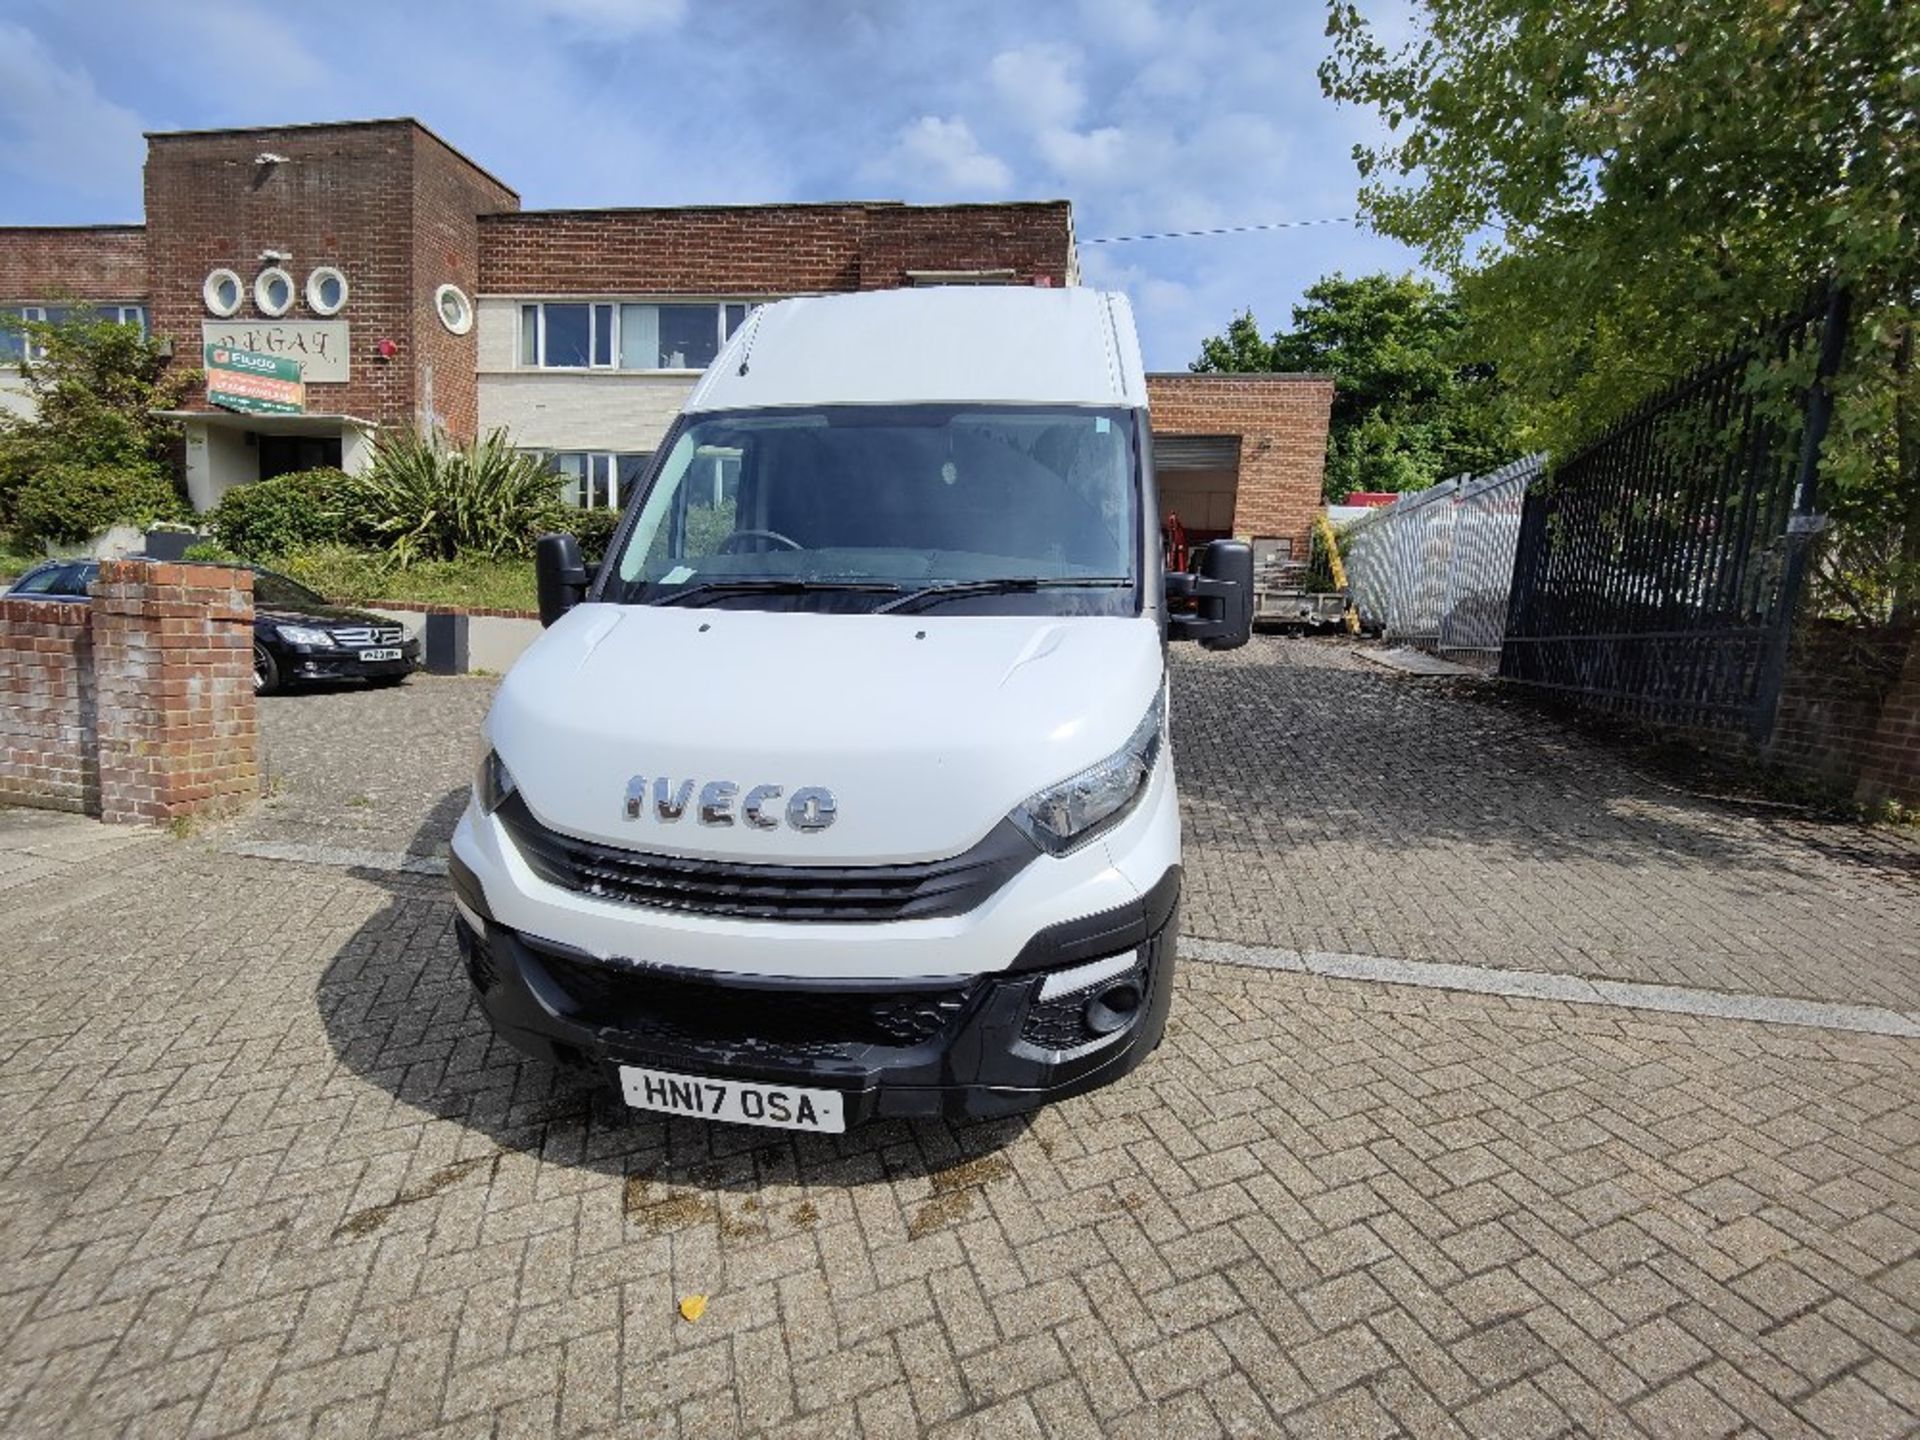 Iveco Daily 3520 WB 2.3D 35S14 High Roof Van - Image 3 of 23